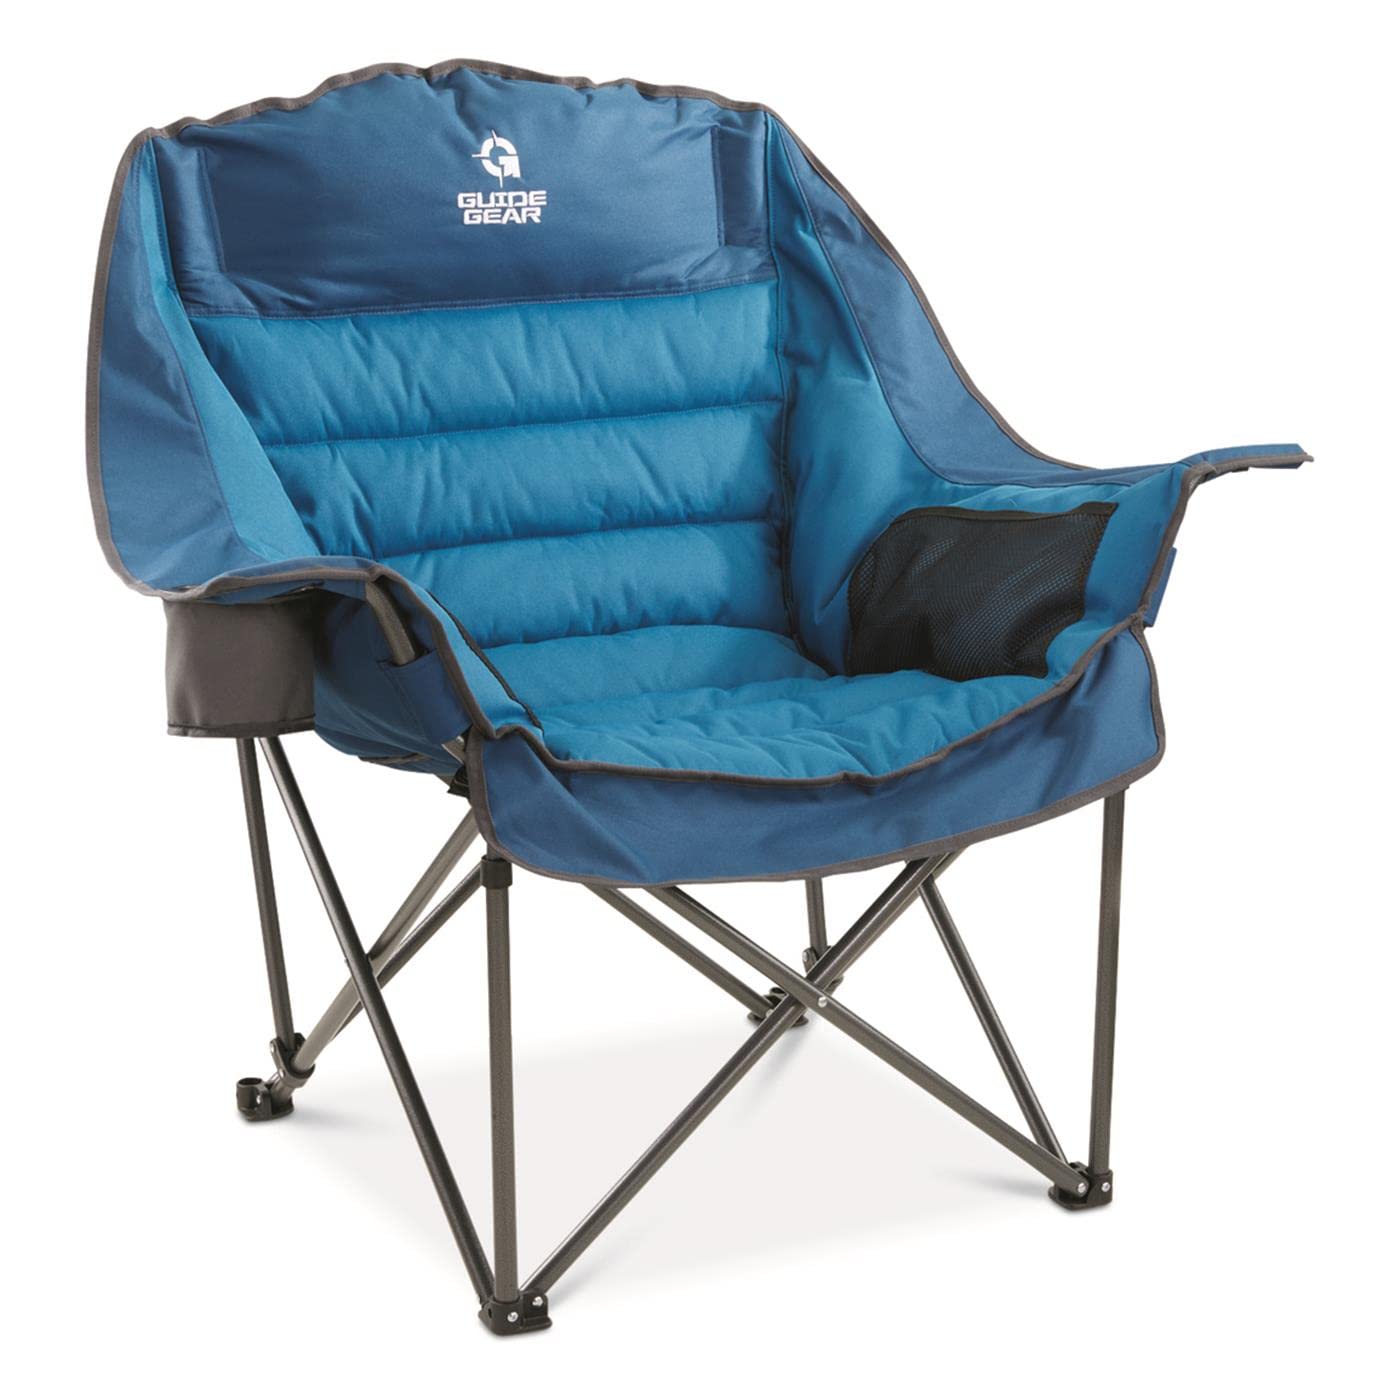 Guide Gear Oversized XL Padded Camping Chair